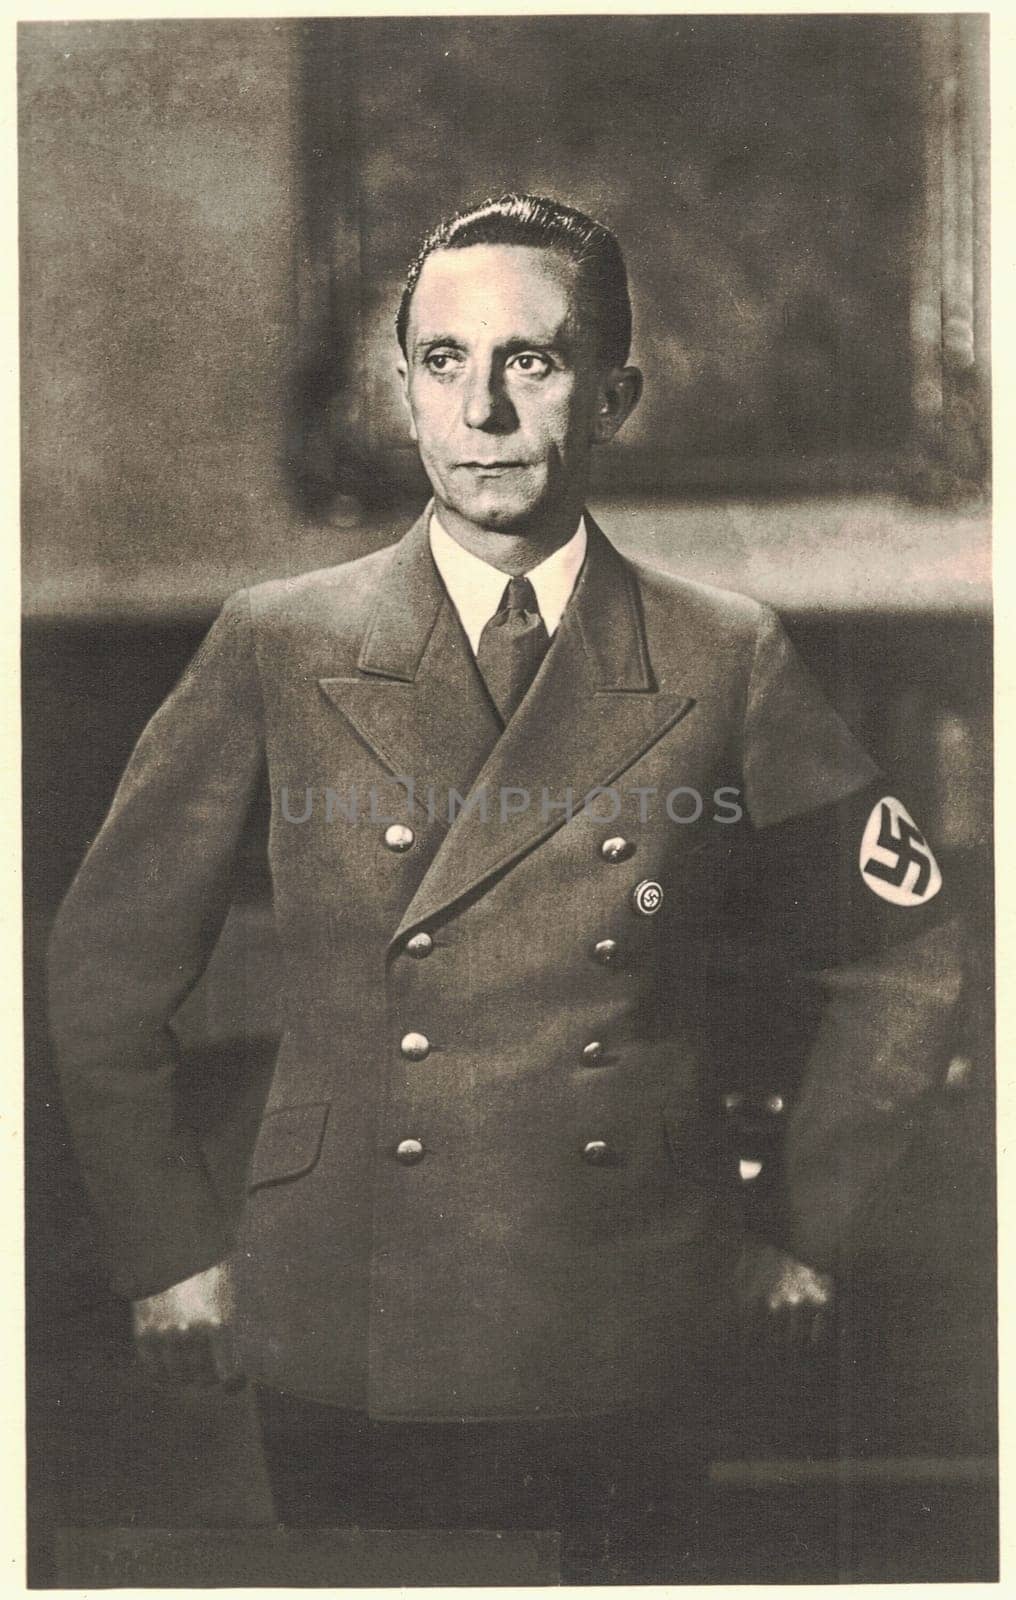 GERMANY - CIRCA 1940s: Paul Joseph Goebbels (29 October 1897-1 May 1945) was a German Nazi politician and Reich Minister of Propaganda of Nazi Germany from 1933 to 1945. He was one of Adolf Hitler's closest and most devoted associates, and was known for his skills in public speaking and his deeply virulent antisemitism.